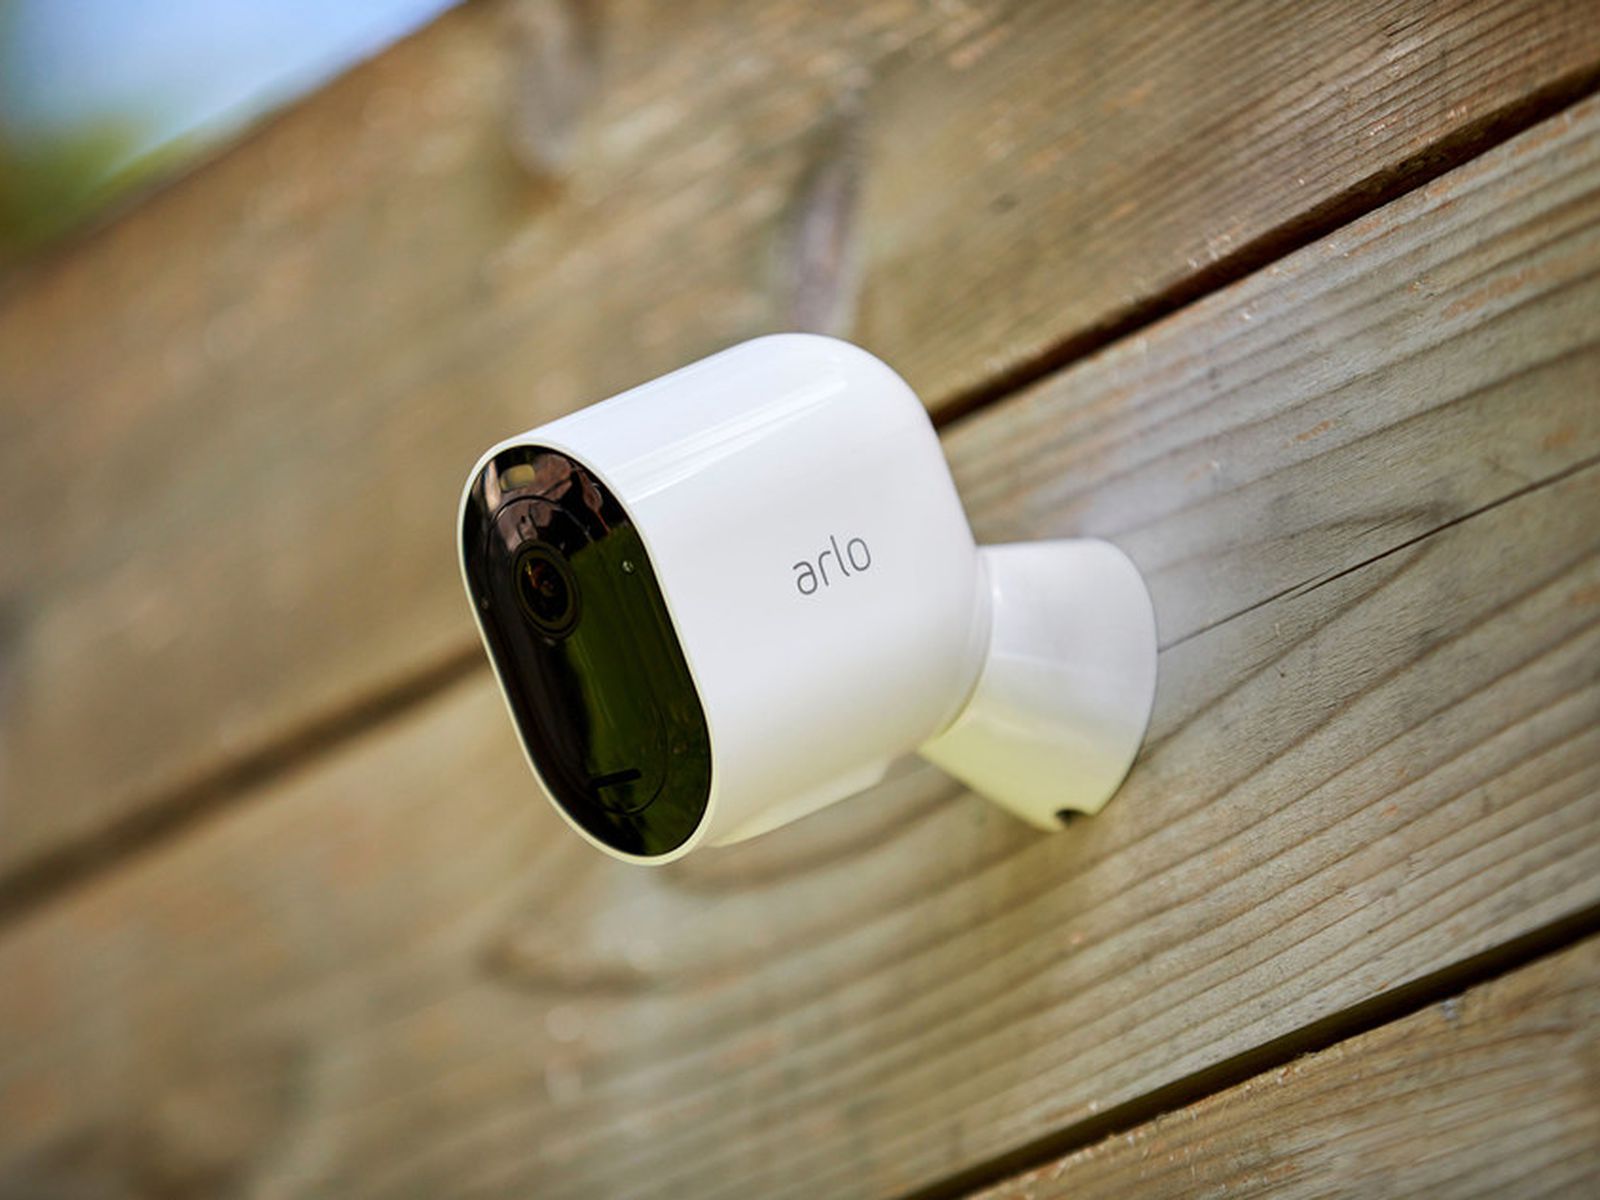 Introduces Pro 4 Security Camera With Easier Wi-Fi Setup, But Lacks HomeKit at Launch [Updated] - MacRumors